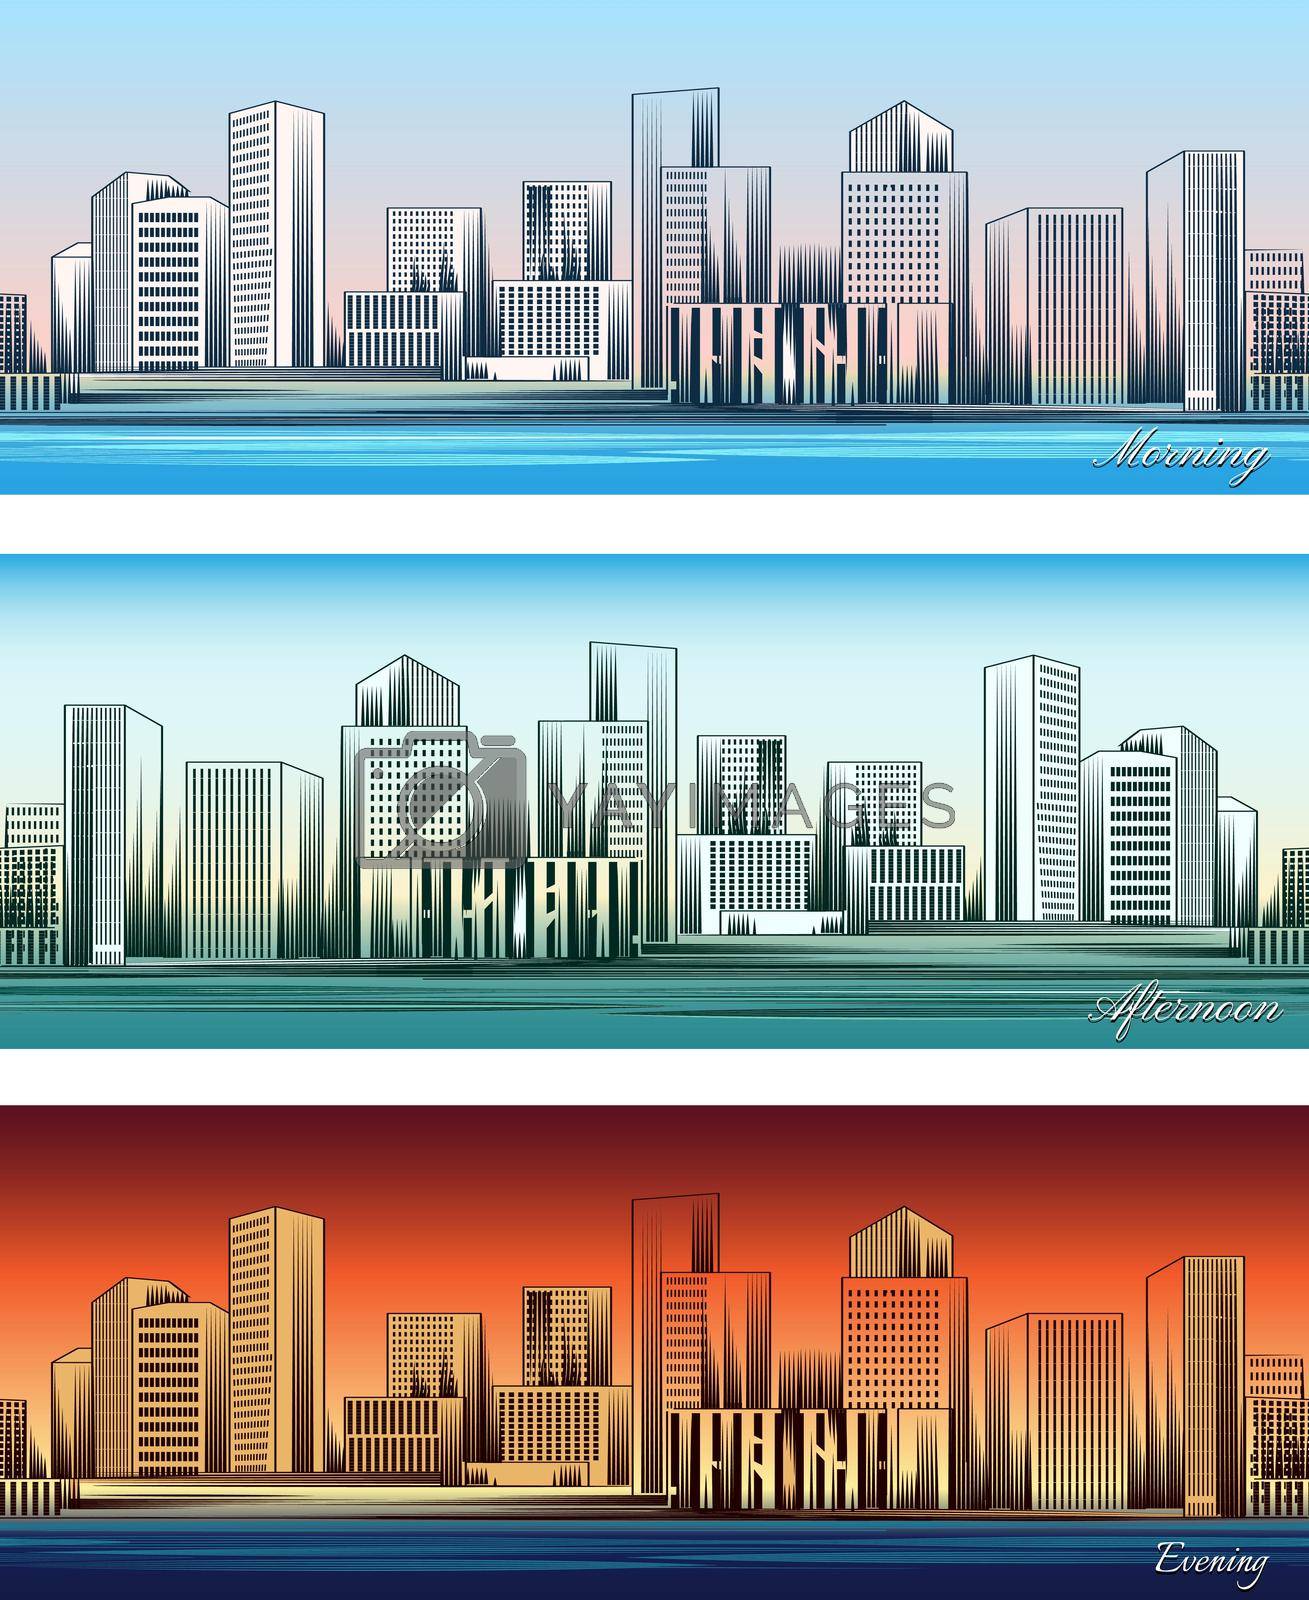 Set of city skylines in morning, afternoon and evening backgrounds seamless. Twilight and business district. Vector illustration